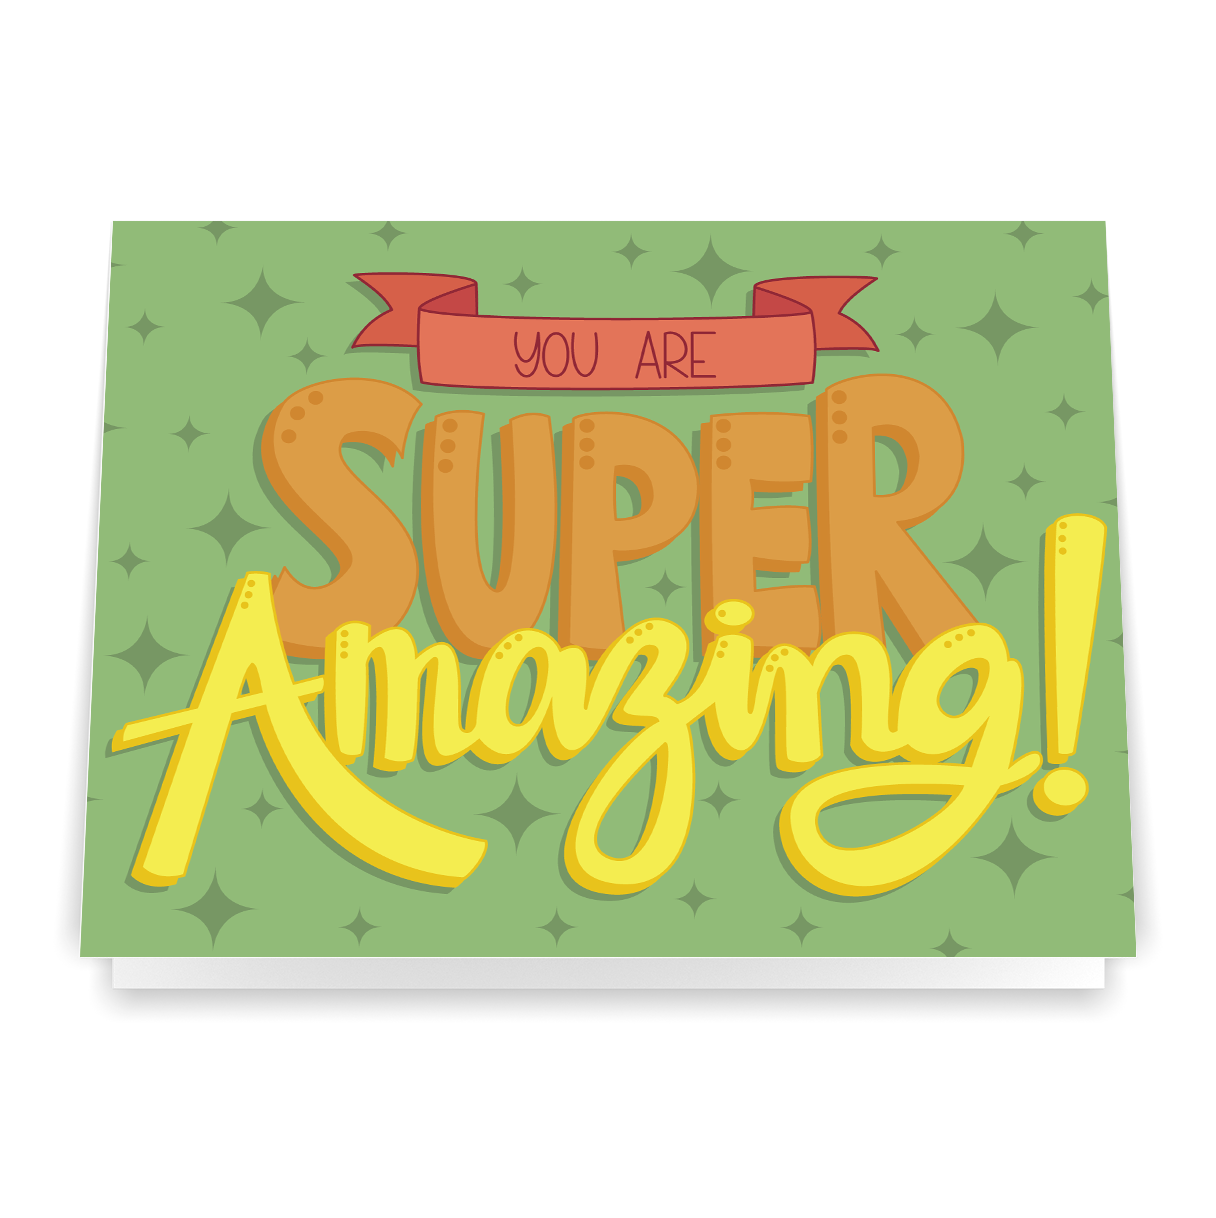 You Are Super Amazing - Greeting Card